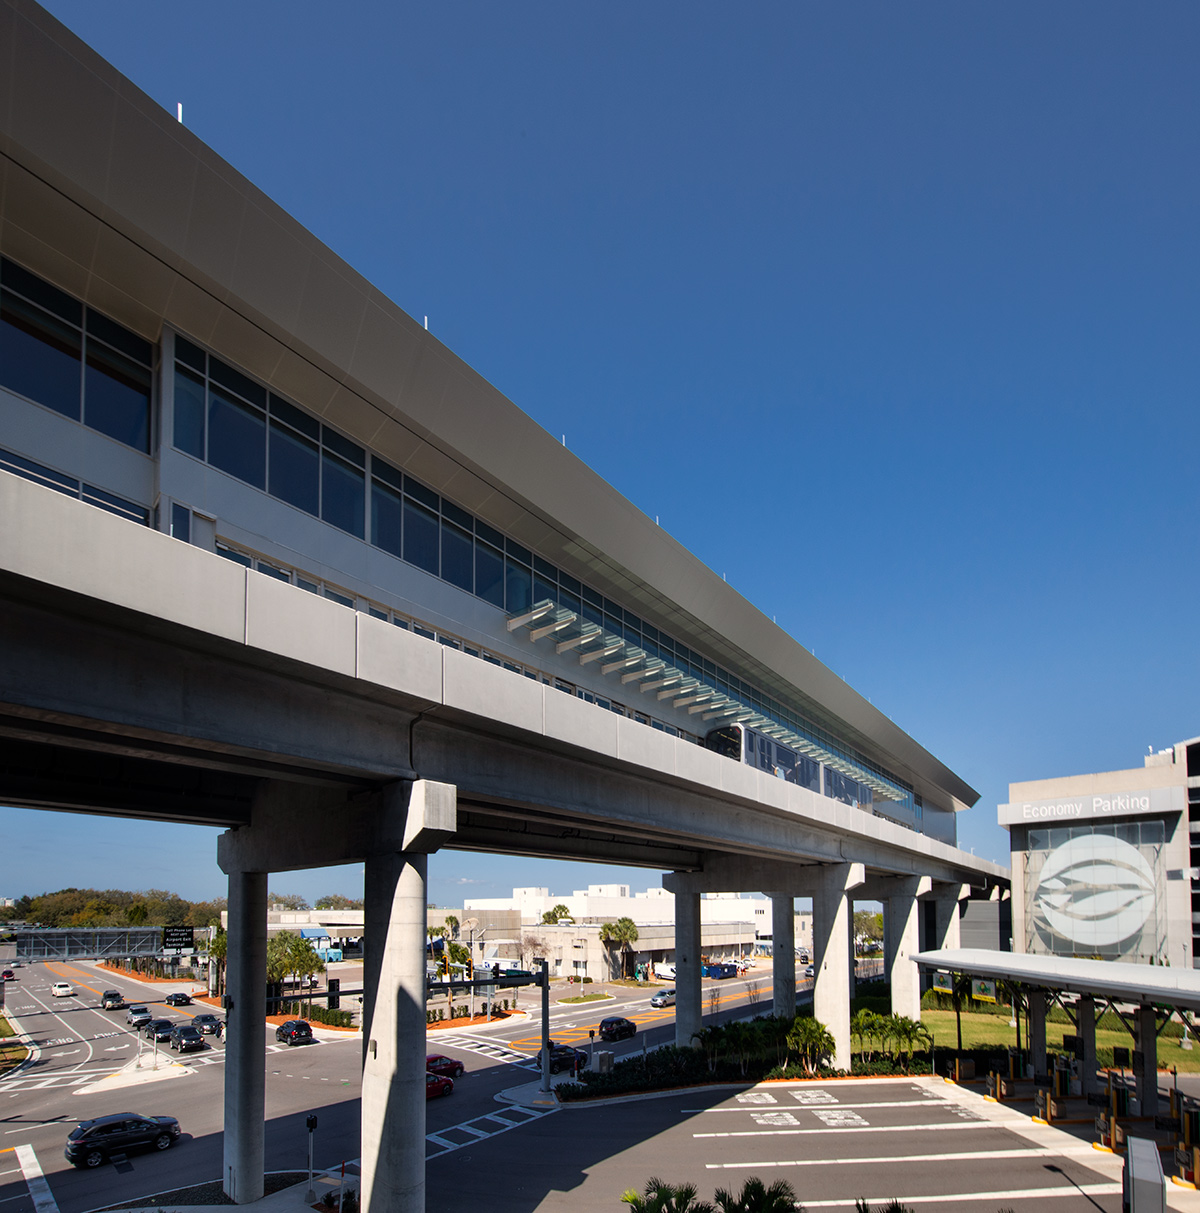 Architectural view of the people mover at the Tampa Int airport.